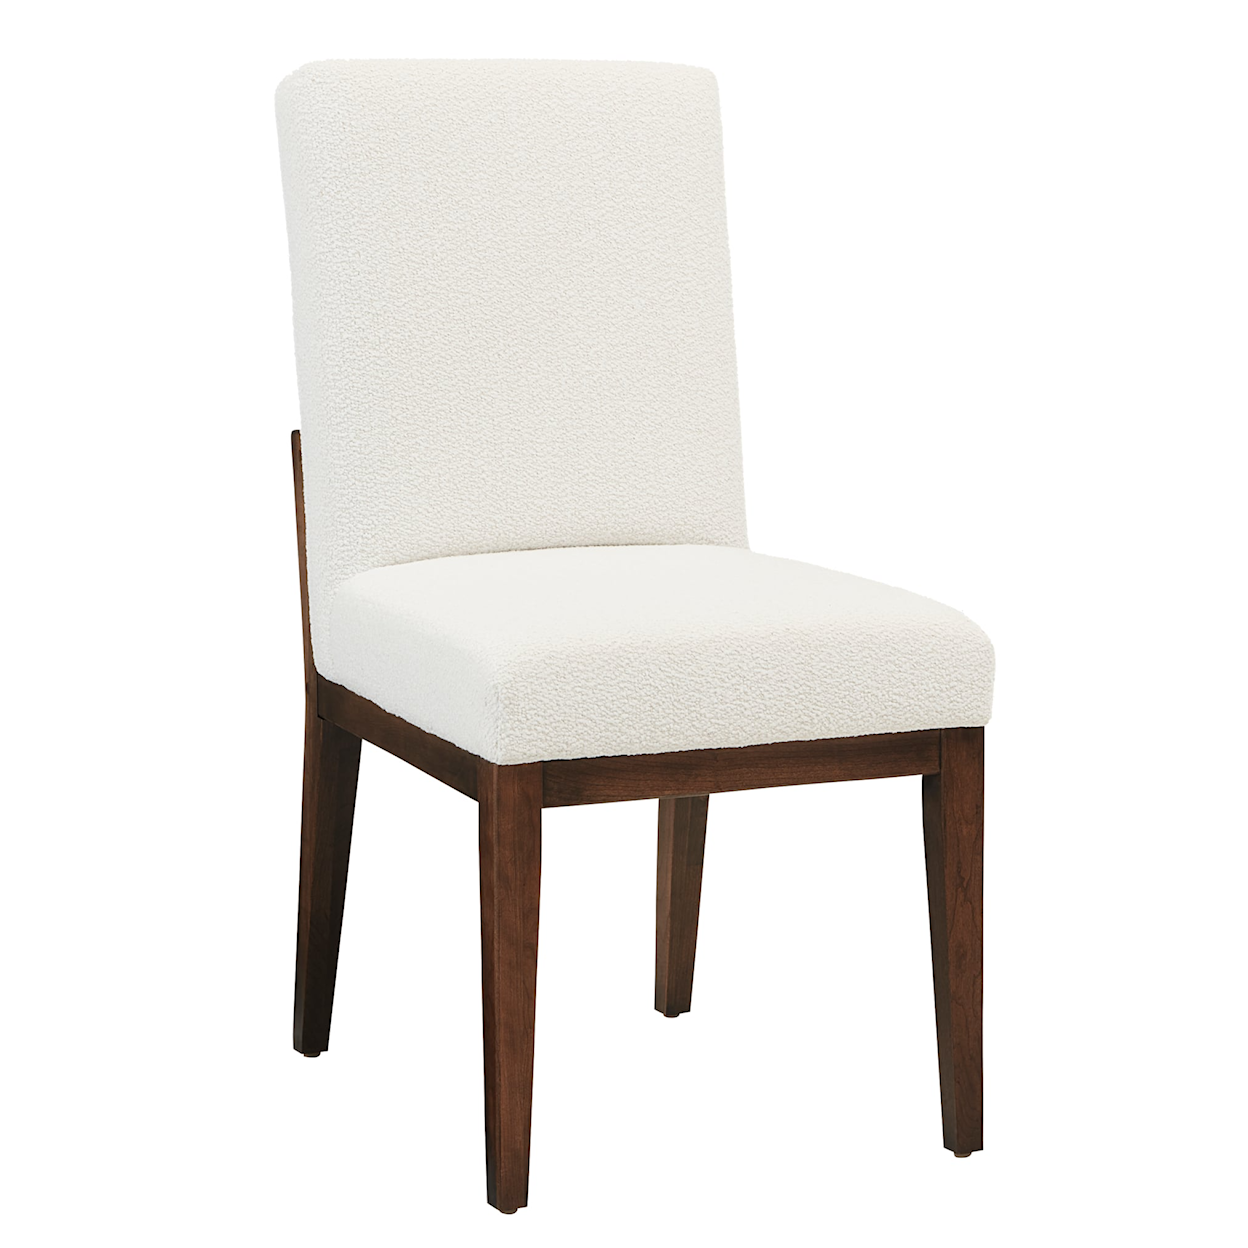 Artisan & Post Crafted Cherry Upholstered Side Dining Chair